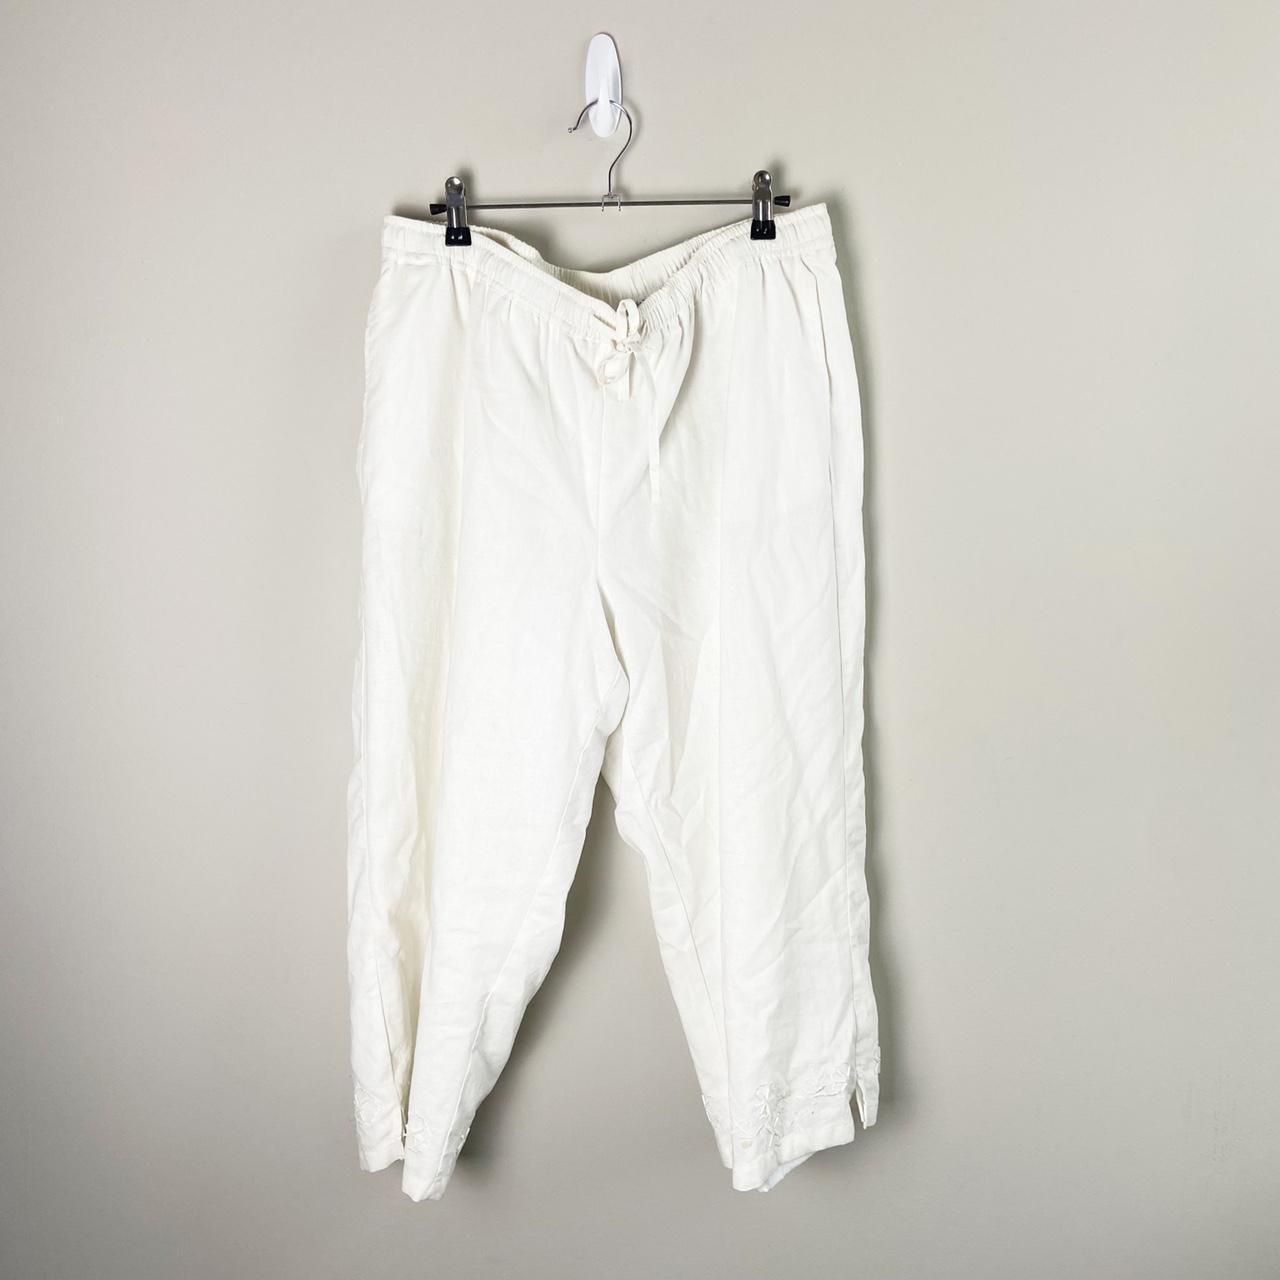 How to style: Abercrombie petite white linen pants